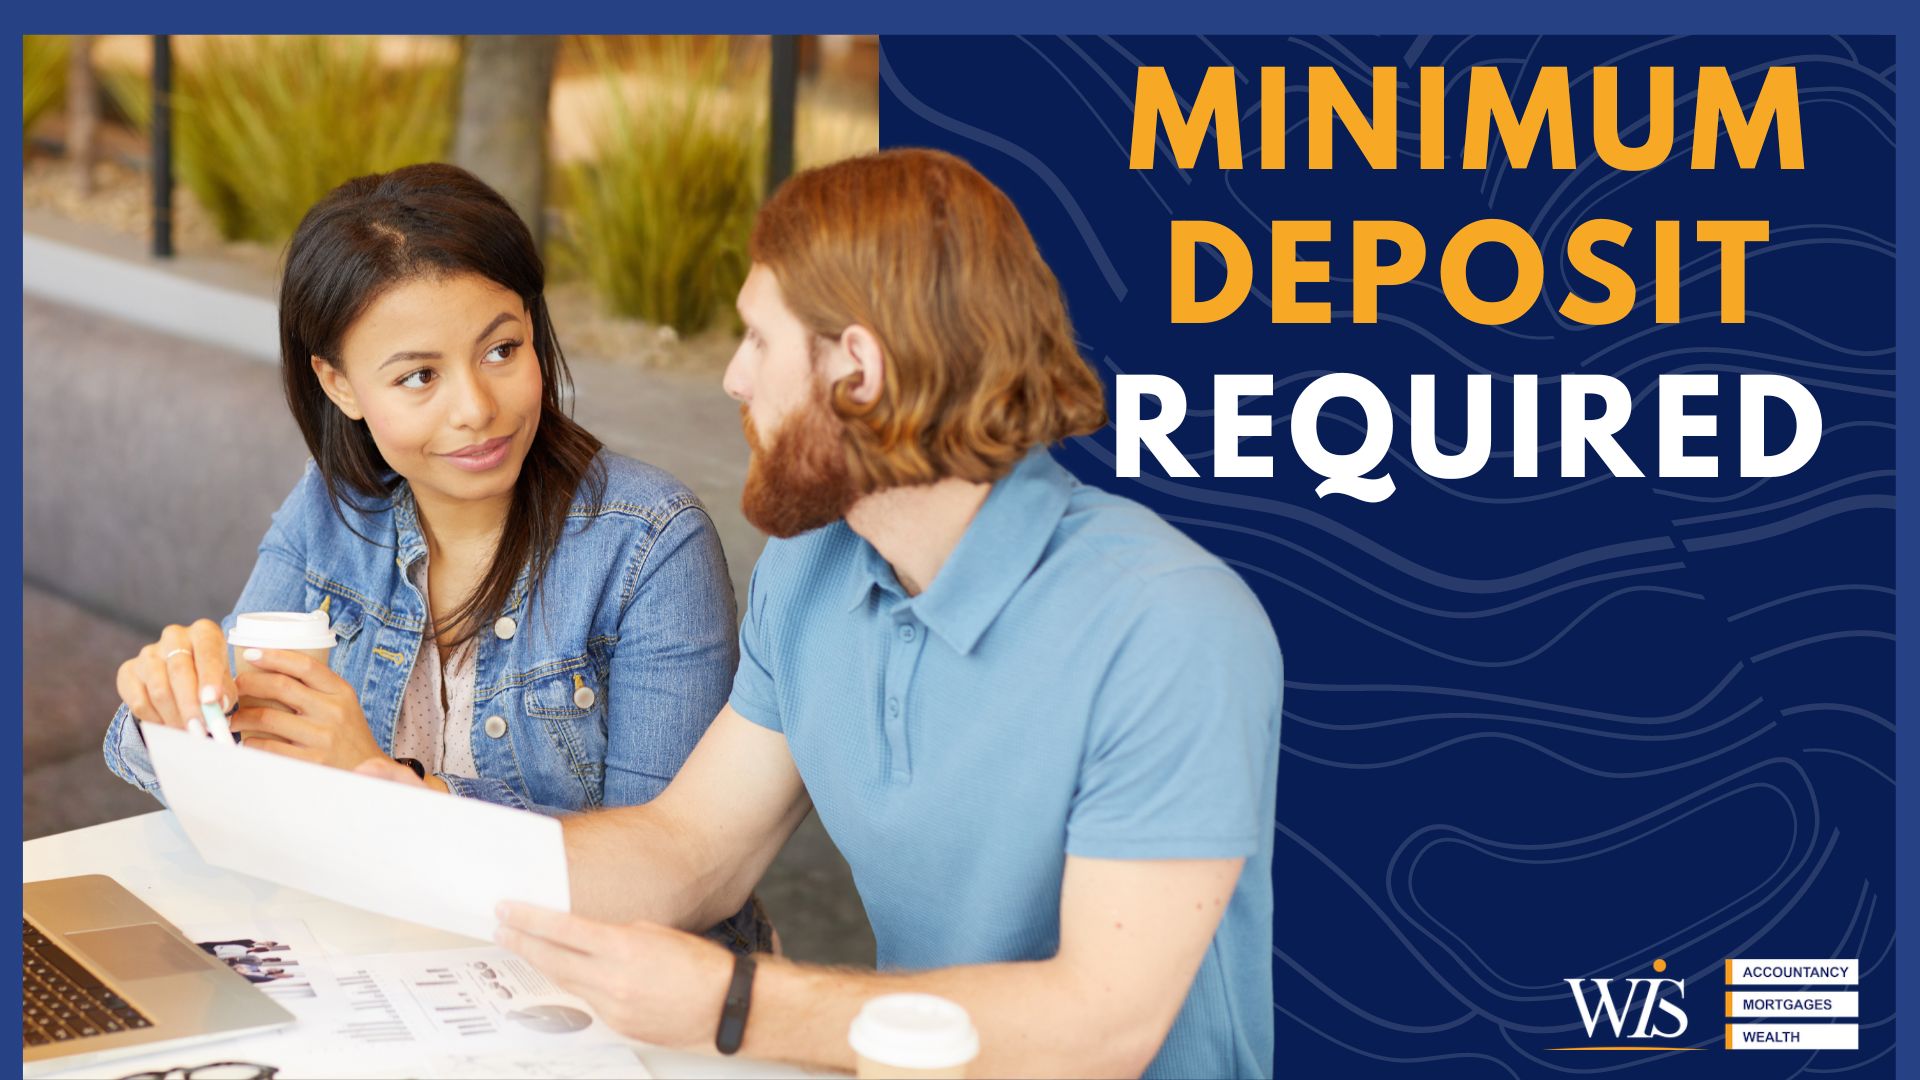 What is the minimum deposit required for a mortgage in the UK? image